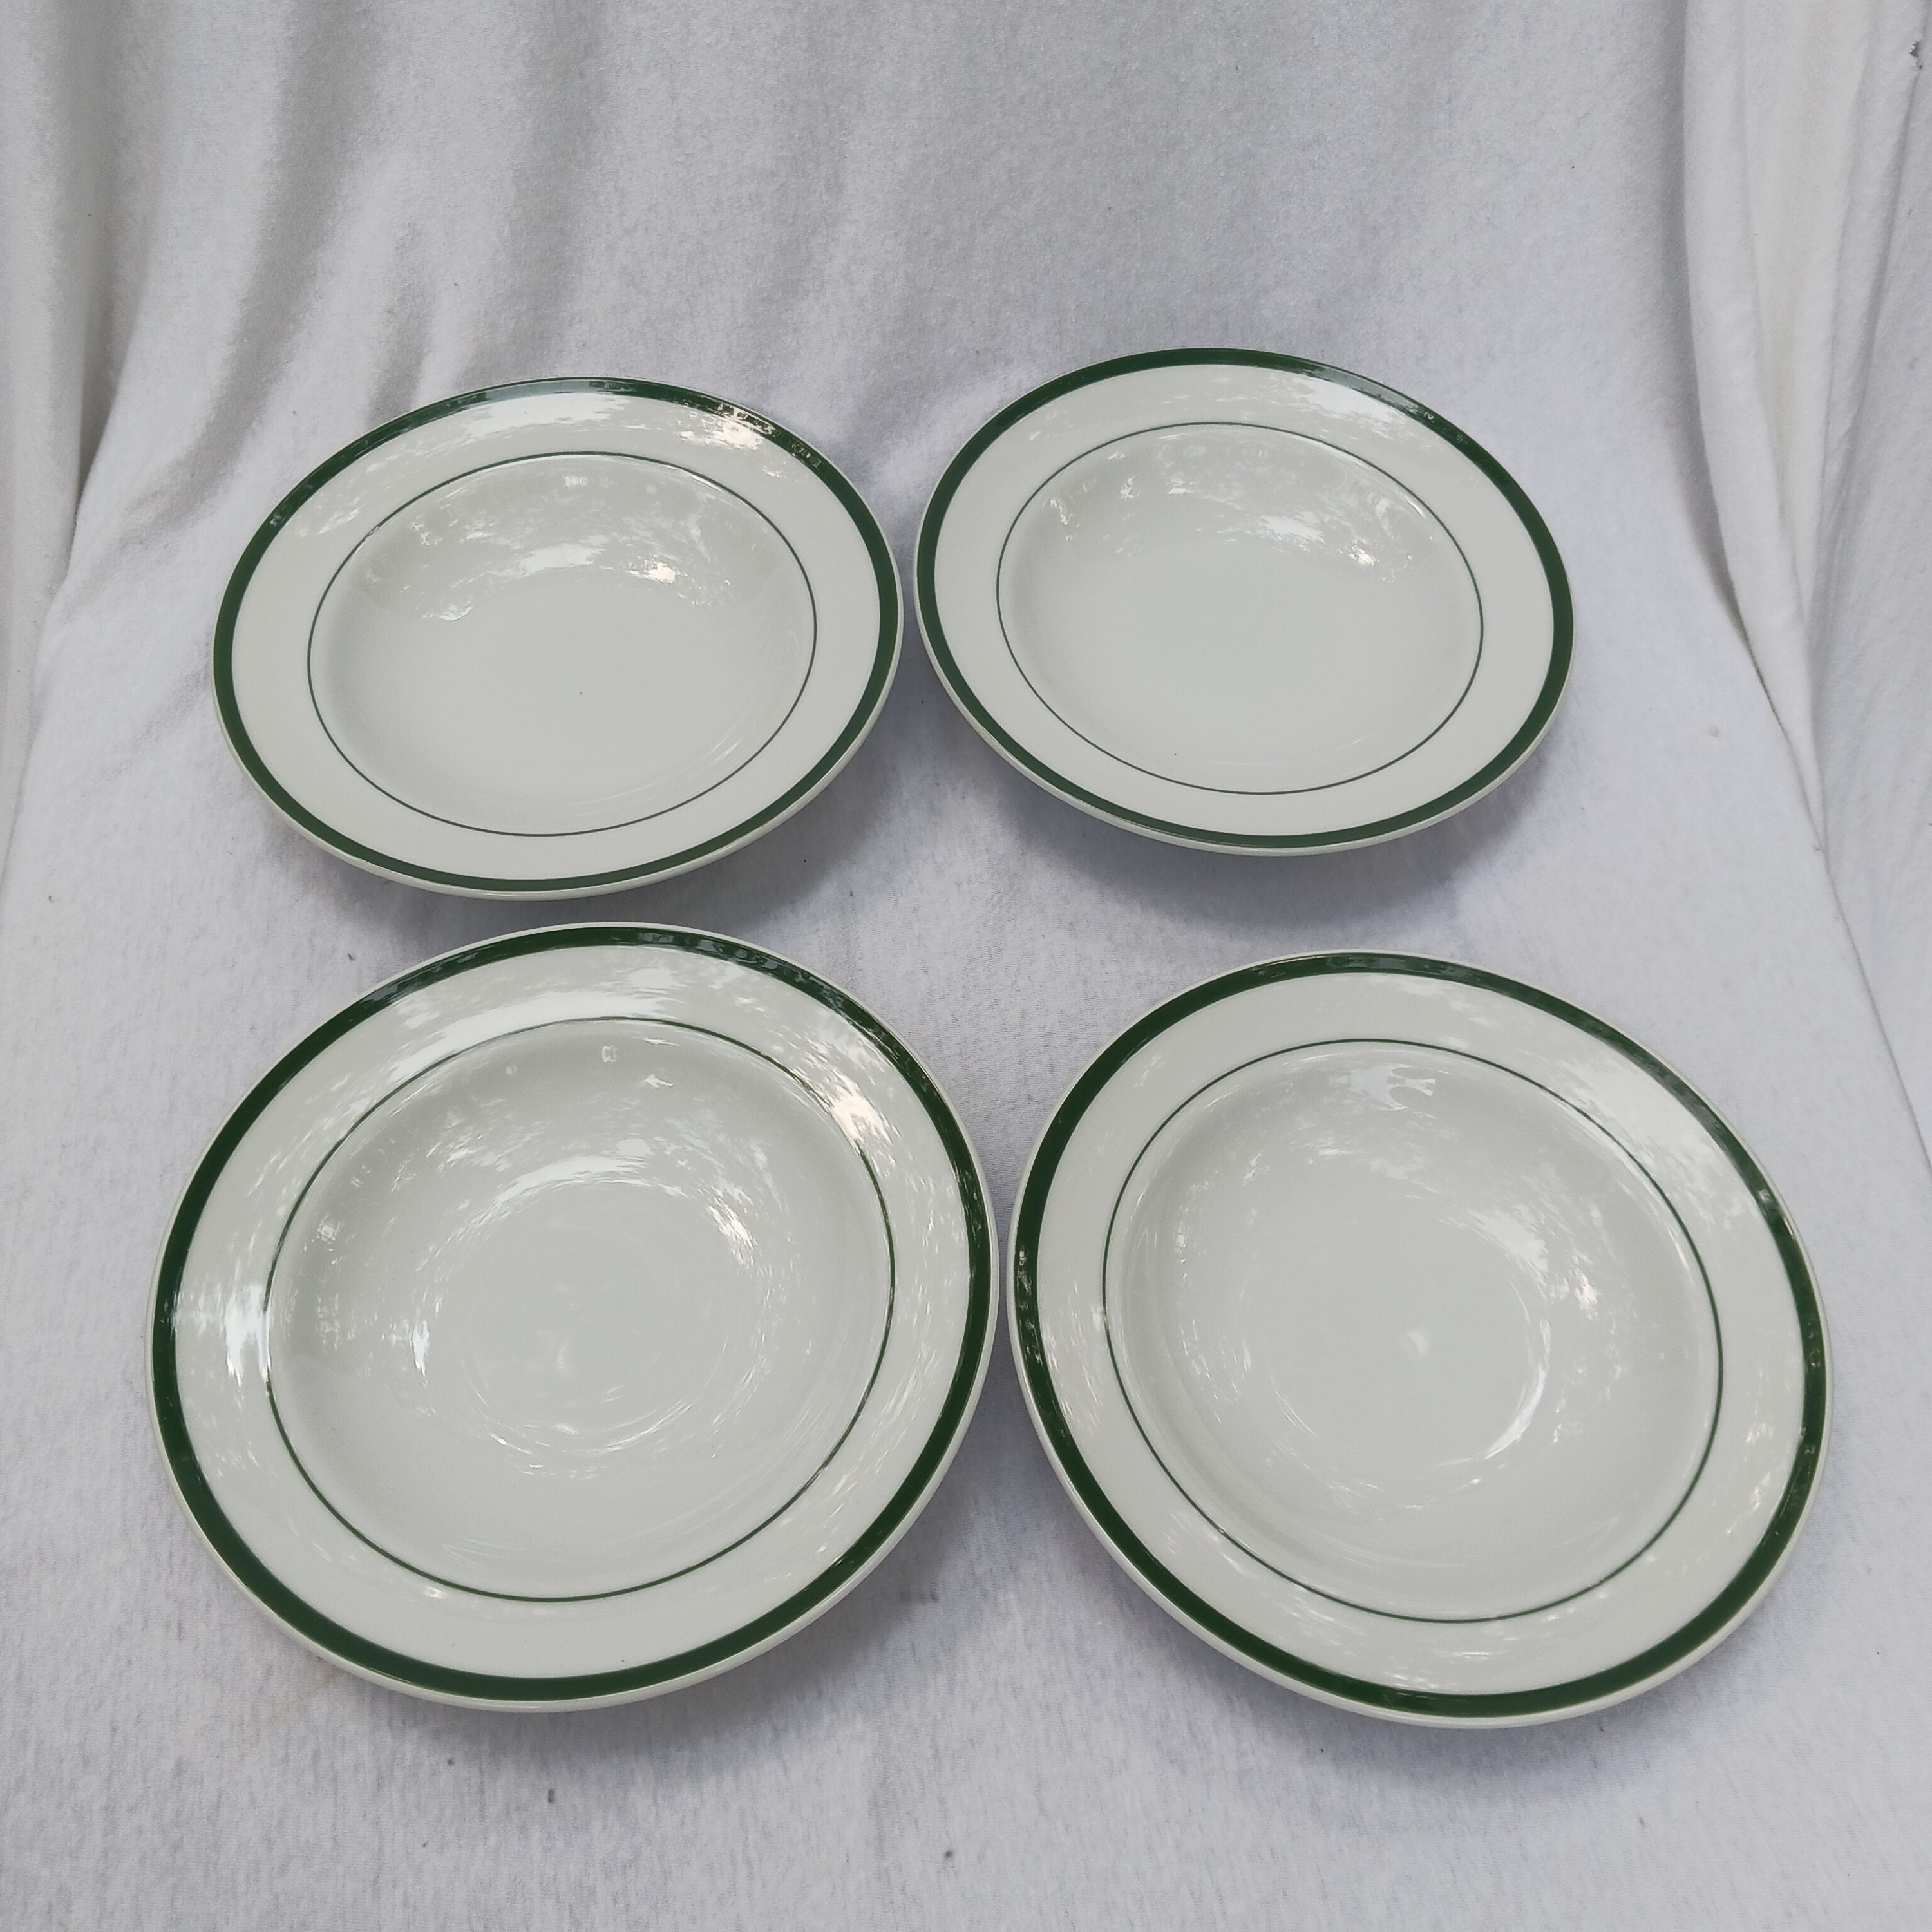 Set of Four William-Sonoma Brasserie Green and White Soup/Salad Bowls